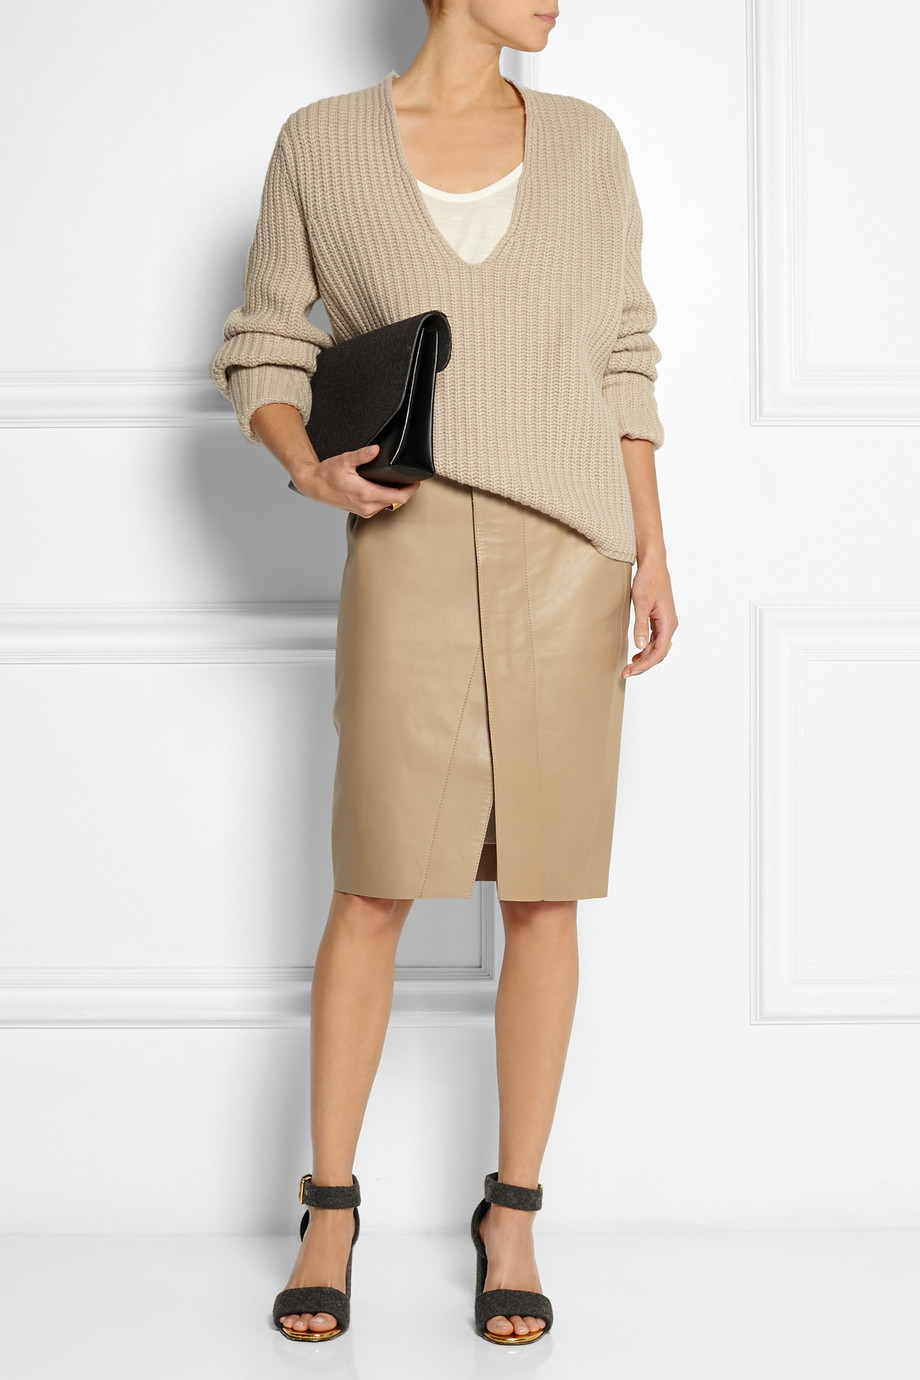 Lyst - Acne Studios Kay Leather Skirt in Natural